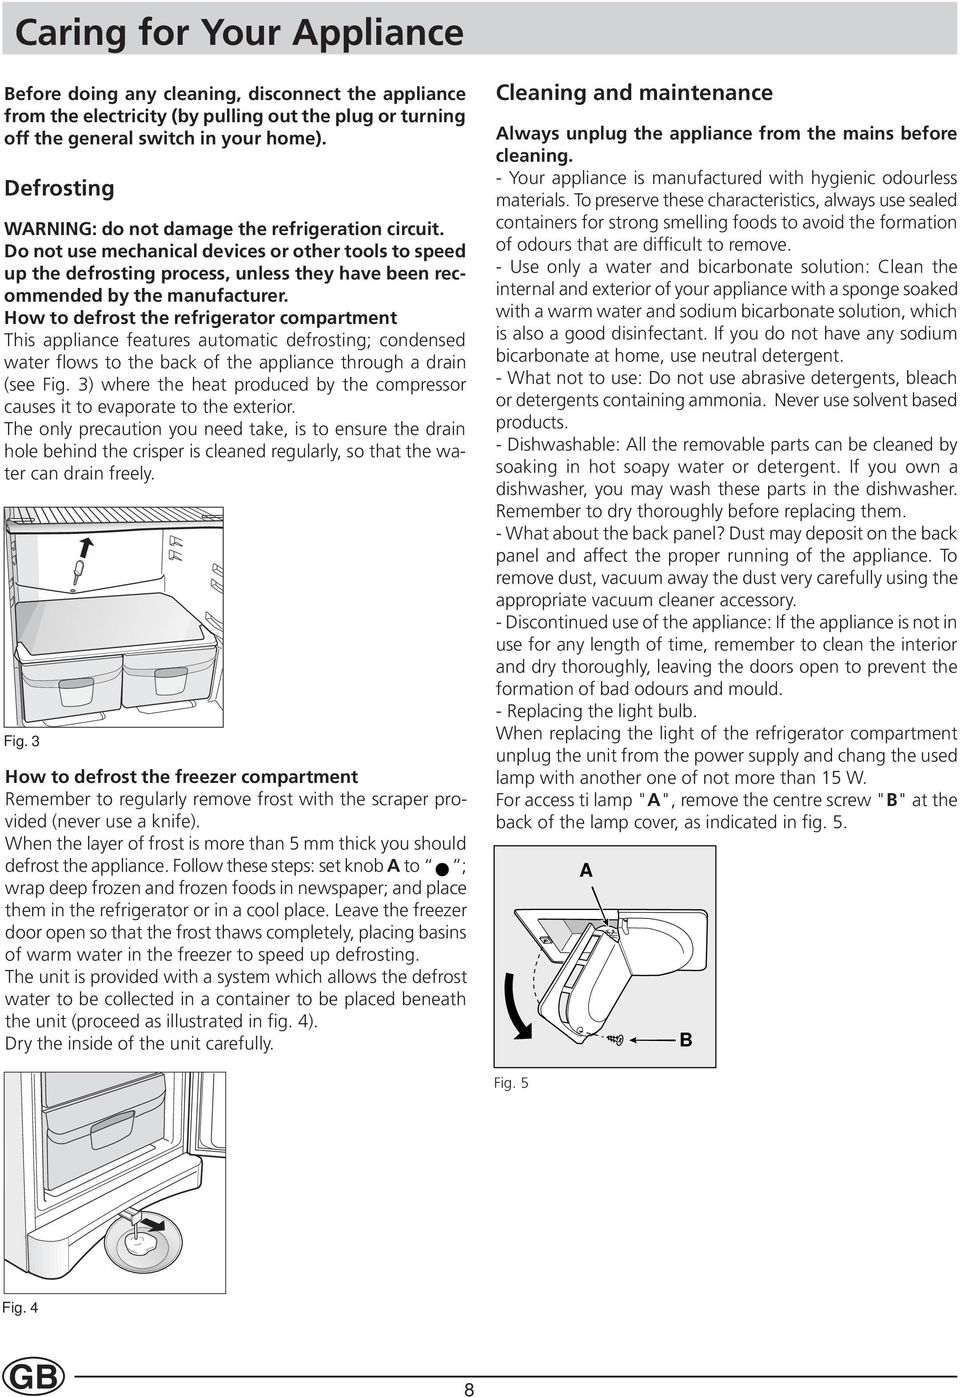 How to defrost the refrigerator compartment This appliance features automatic defrosting; condensed water flows to the back of the appliance through a drain (see Fig.